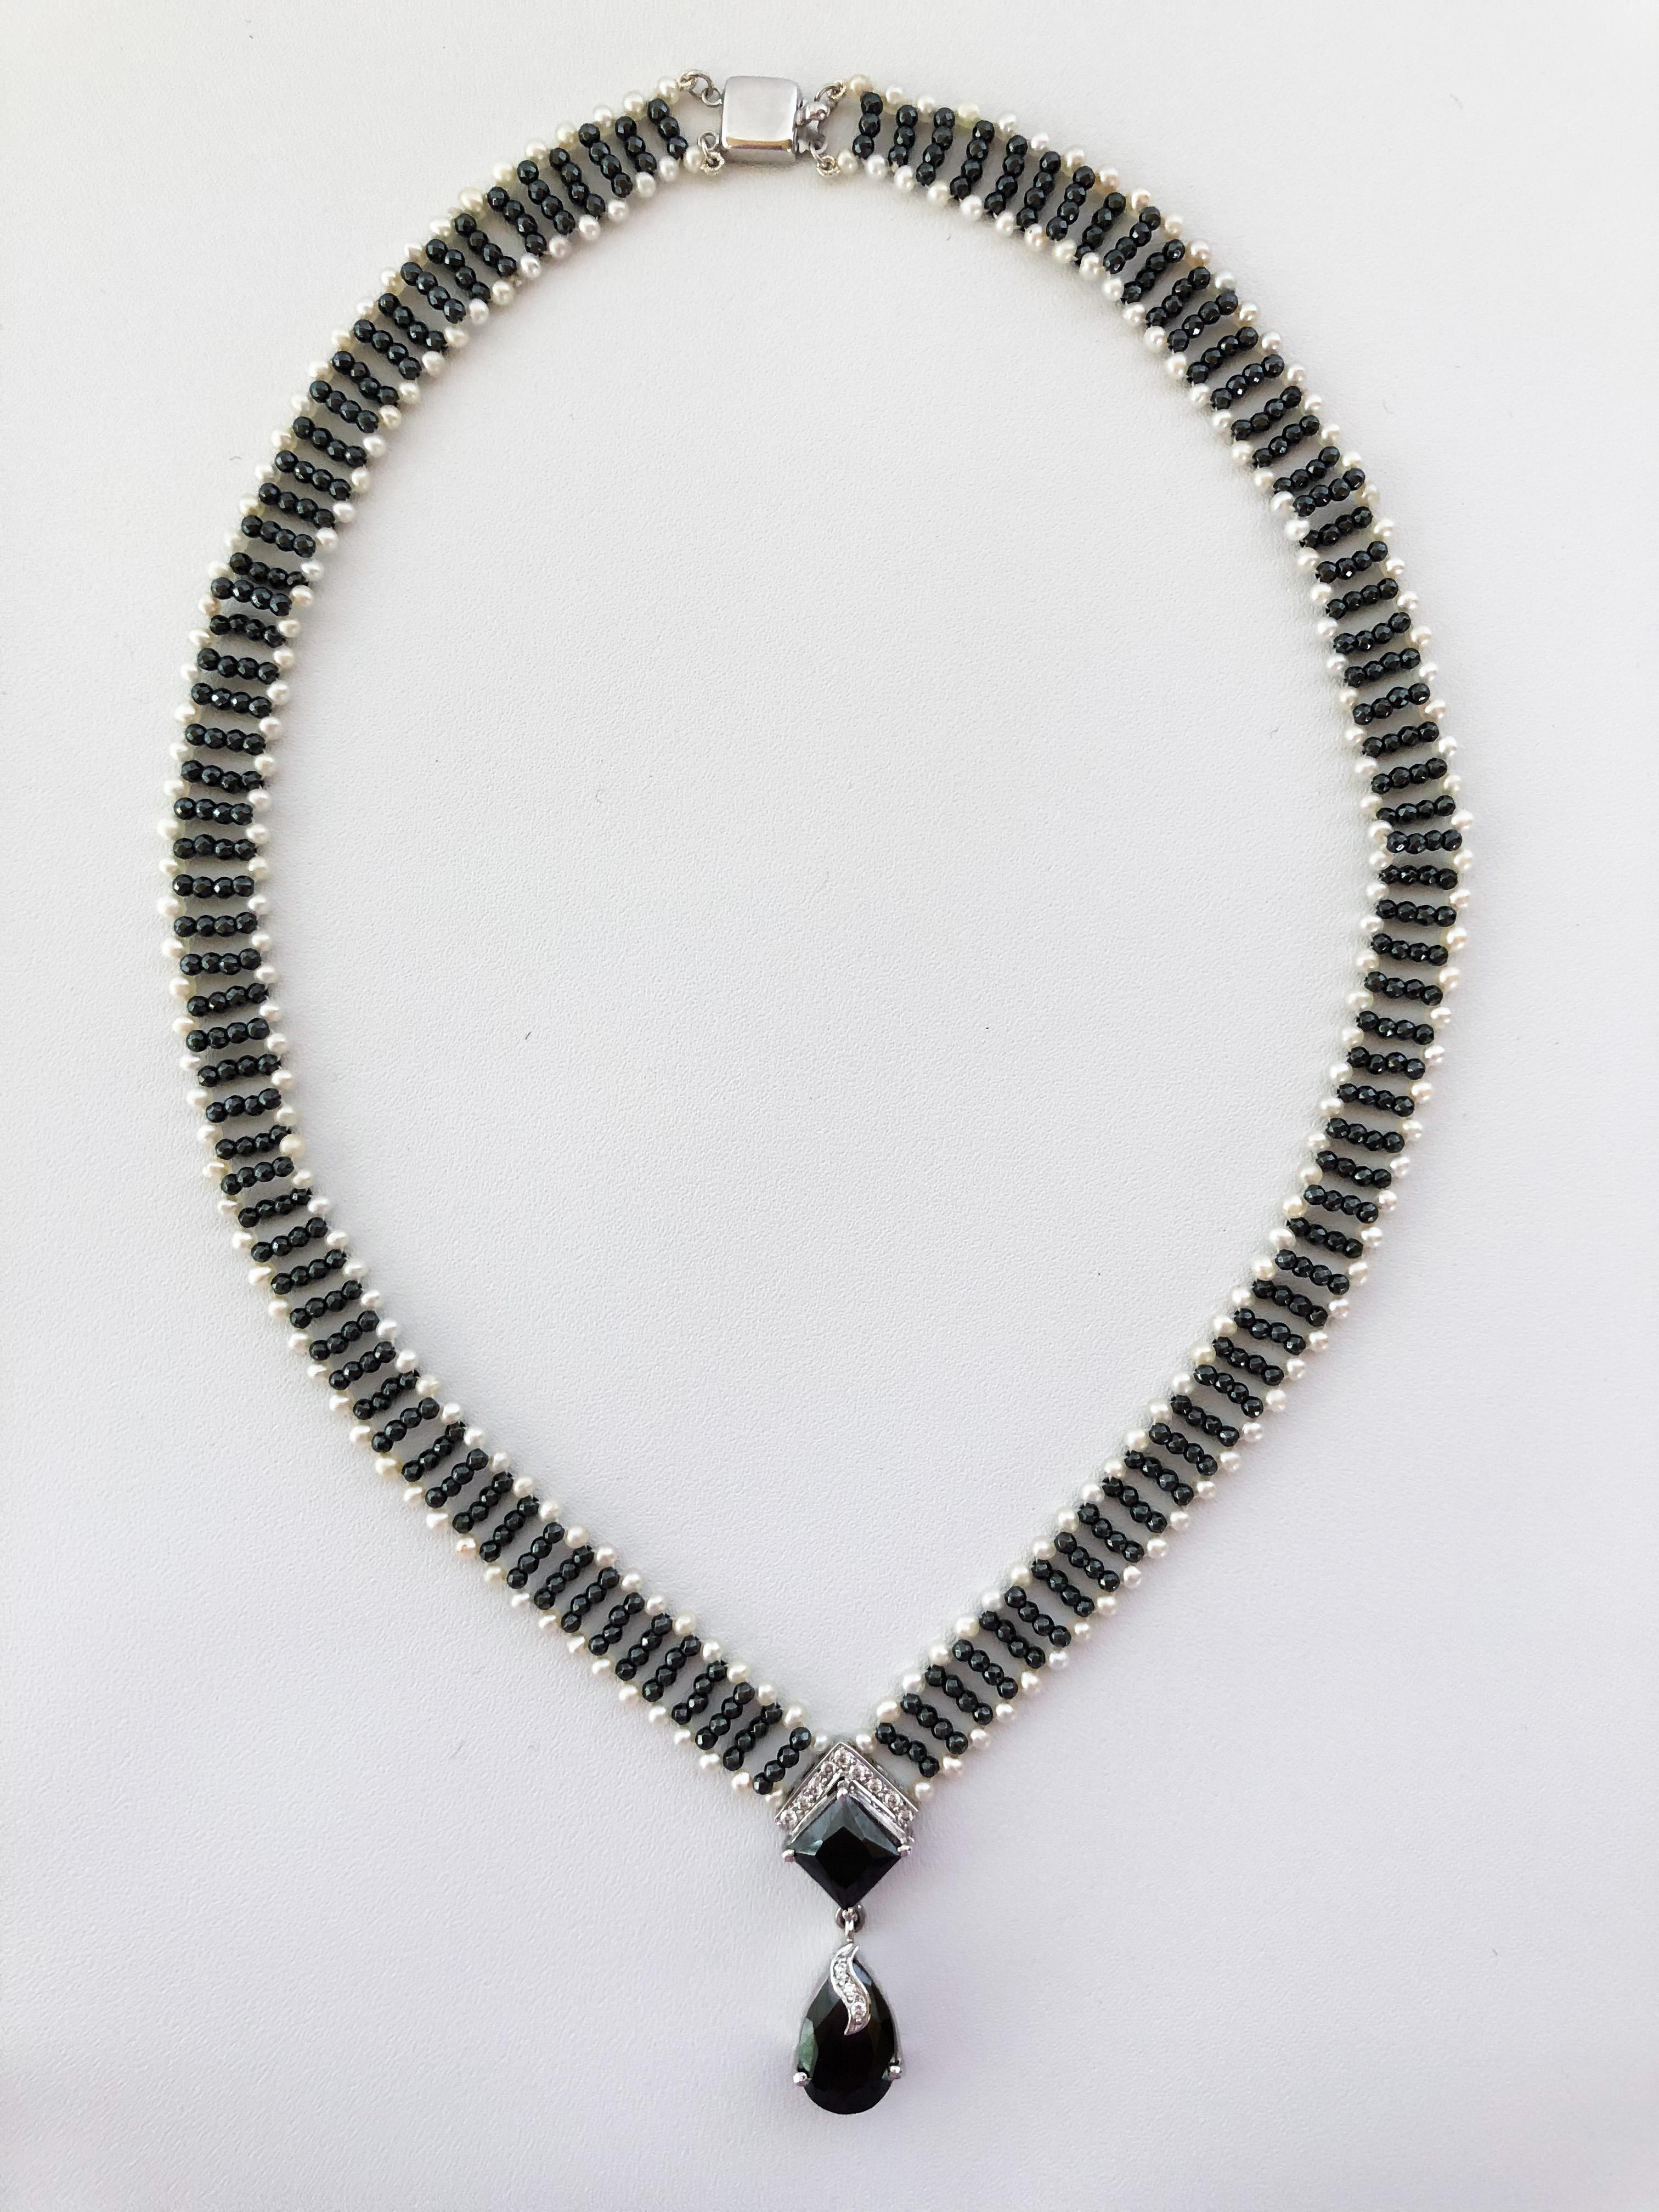 Women's Marina J. Pearl and Hematite Necklace with Diamonds and 14 Karat Gold Clasp